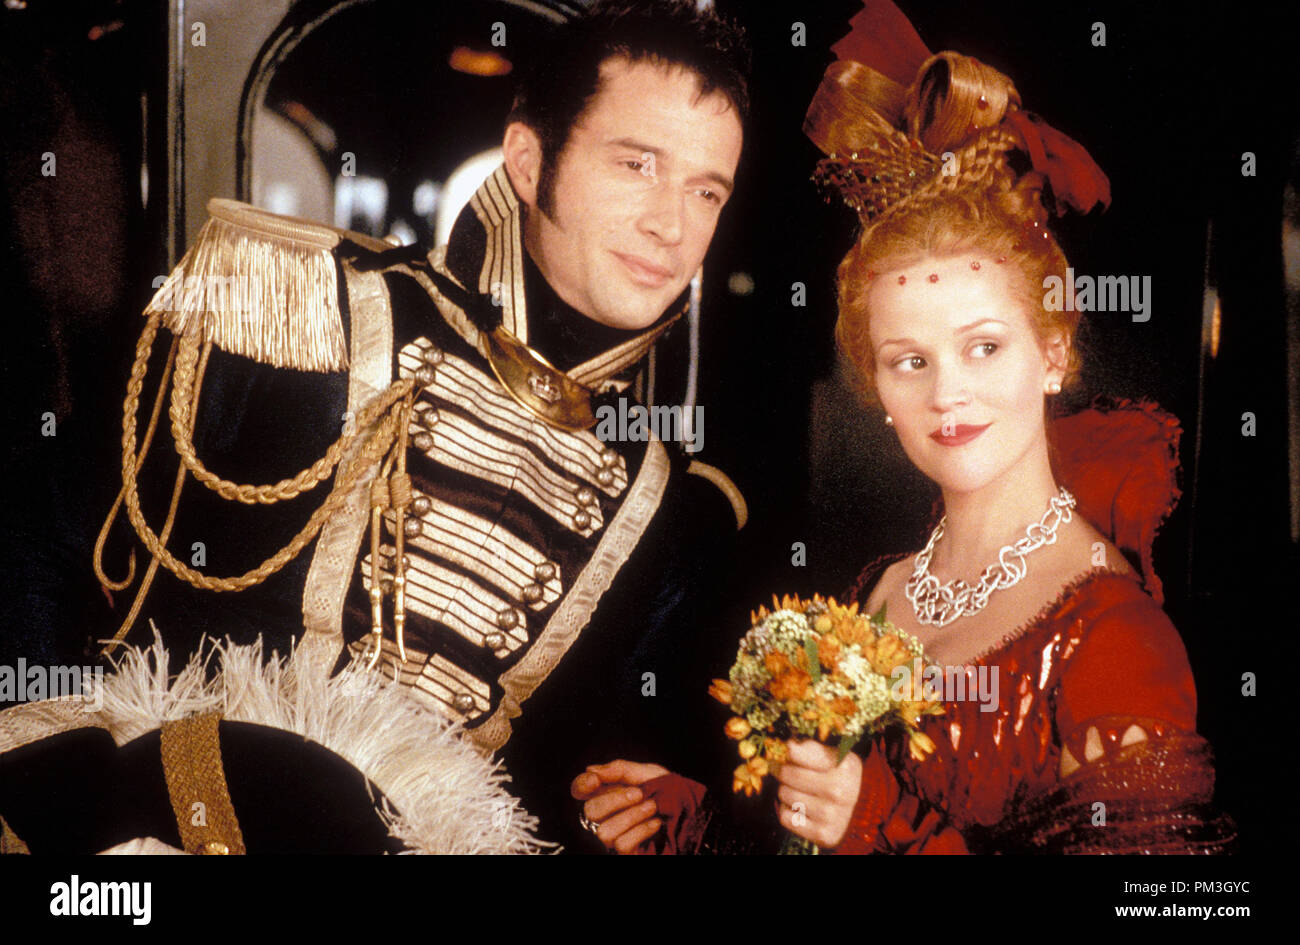 Film Still from 'Vanity Fair' James Purefoy, Reese Witherspoon © 2004 Focus Features  File Reference # 30735716THA  For Editorial Use Only -  All Rights Reserved Stock Photo